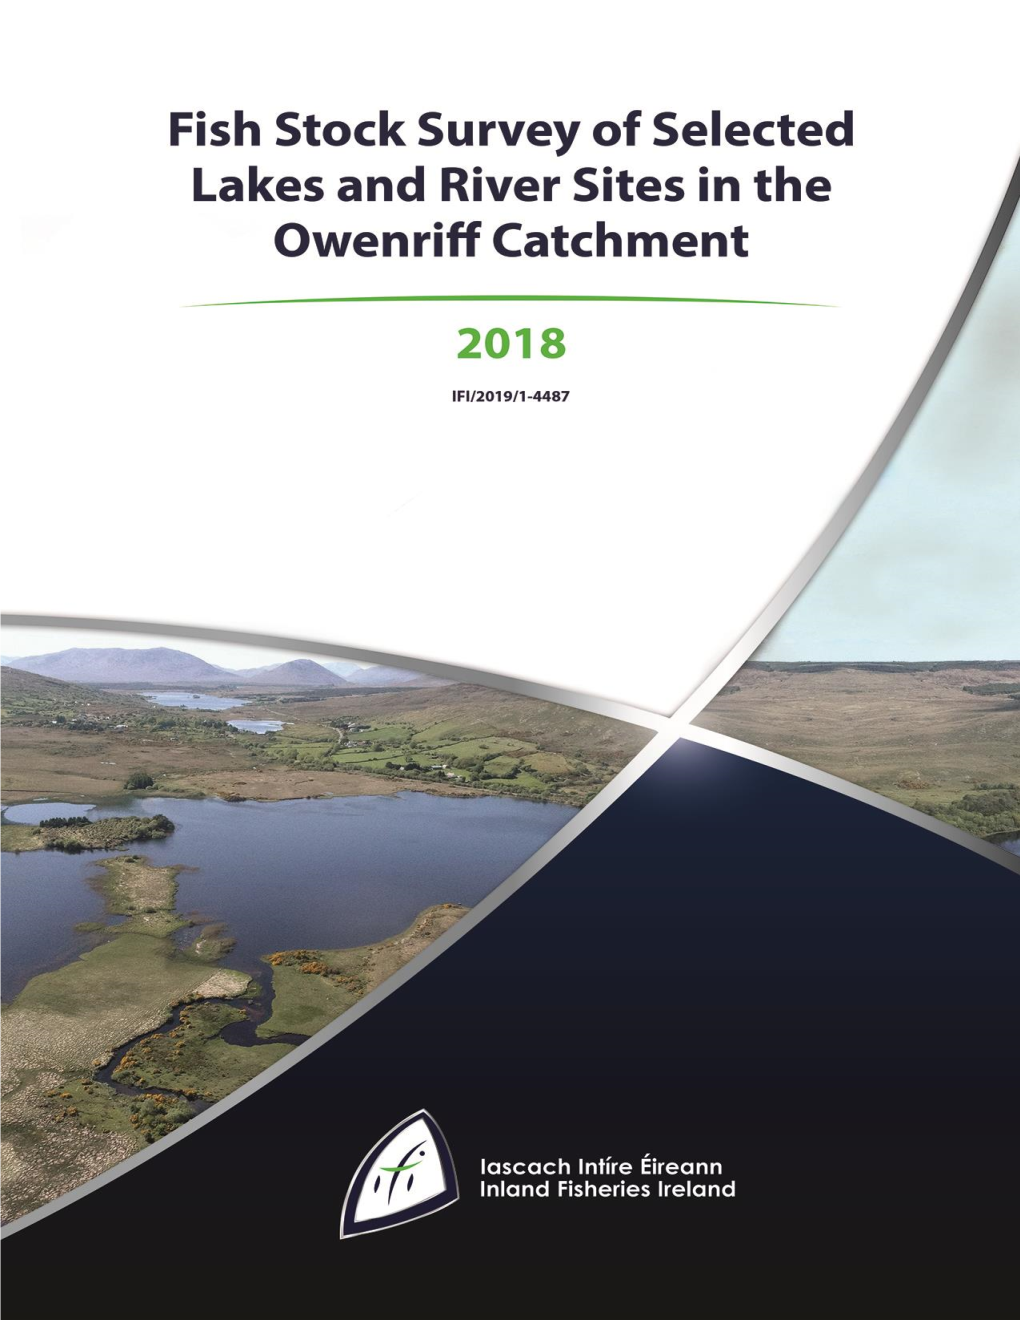 Fish Stock Survey of Selected Lakes and River Sites in the Owenriff Catchment, 2018